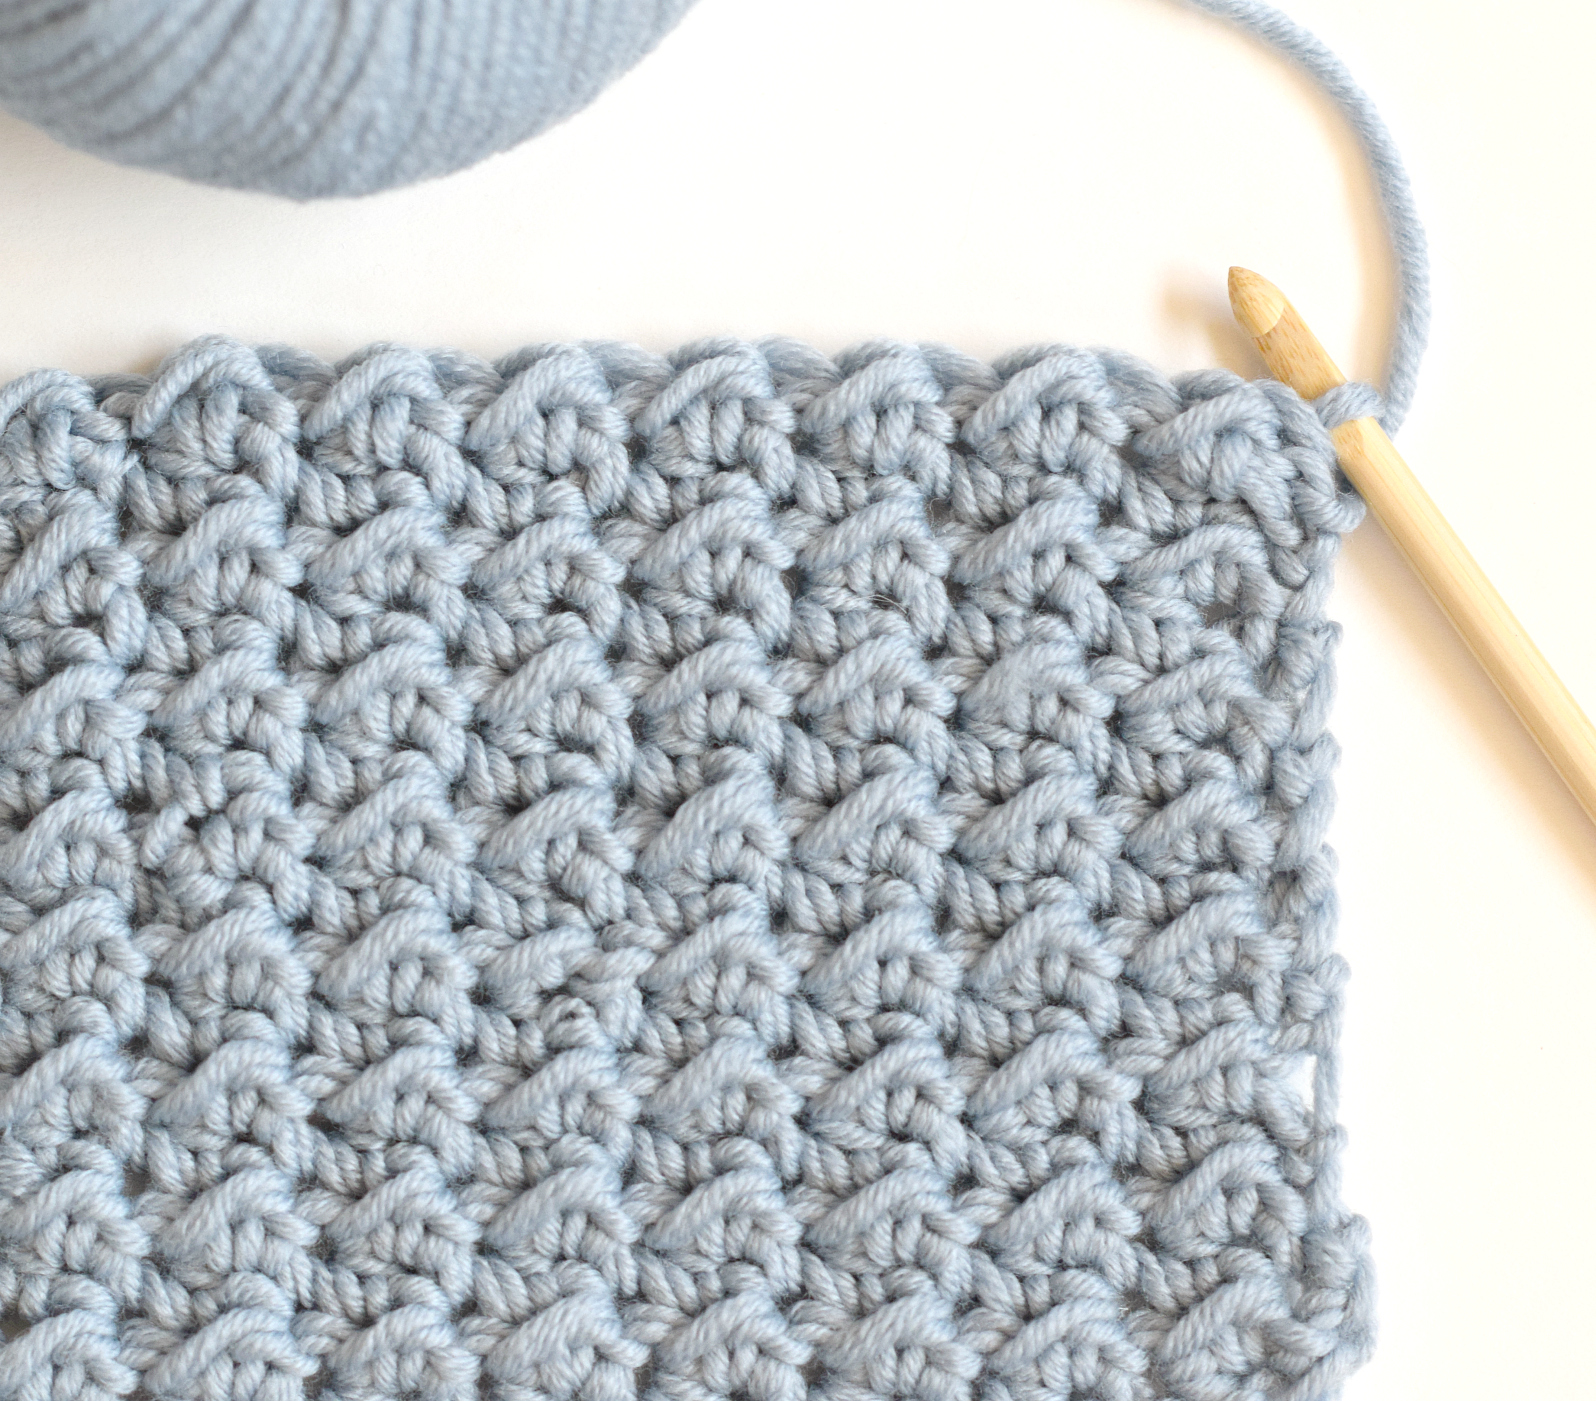 Quick and Easy Crochet Can Cozy Pattern - Extended Moss Stitch Crochet  Pattern Free On Blog 